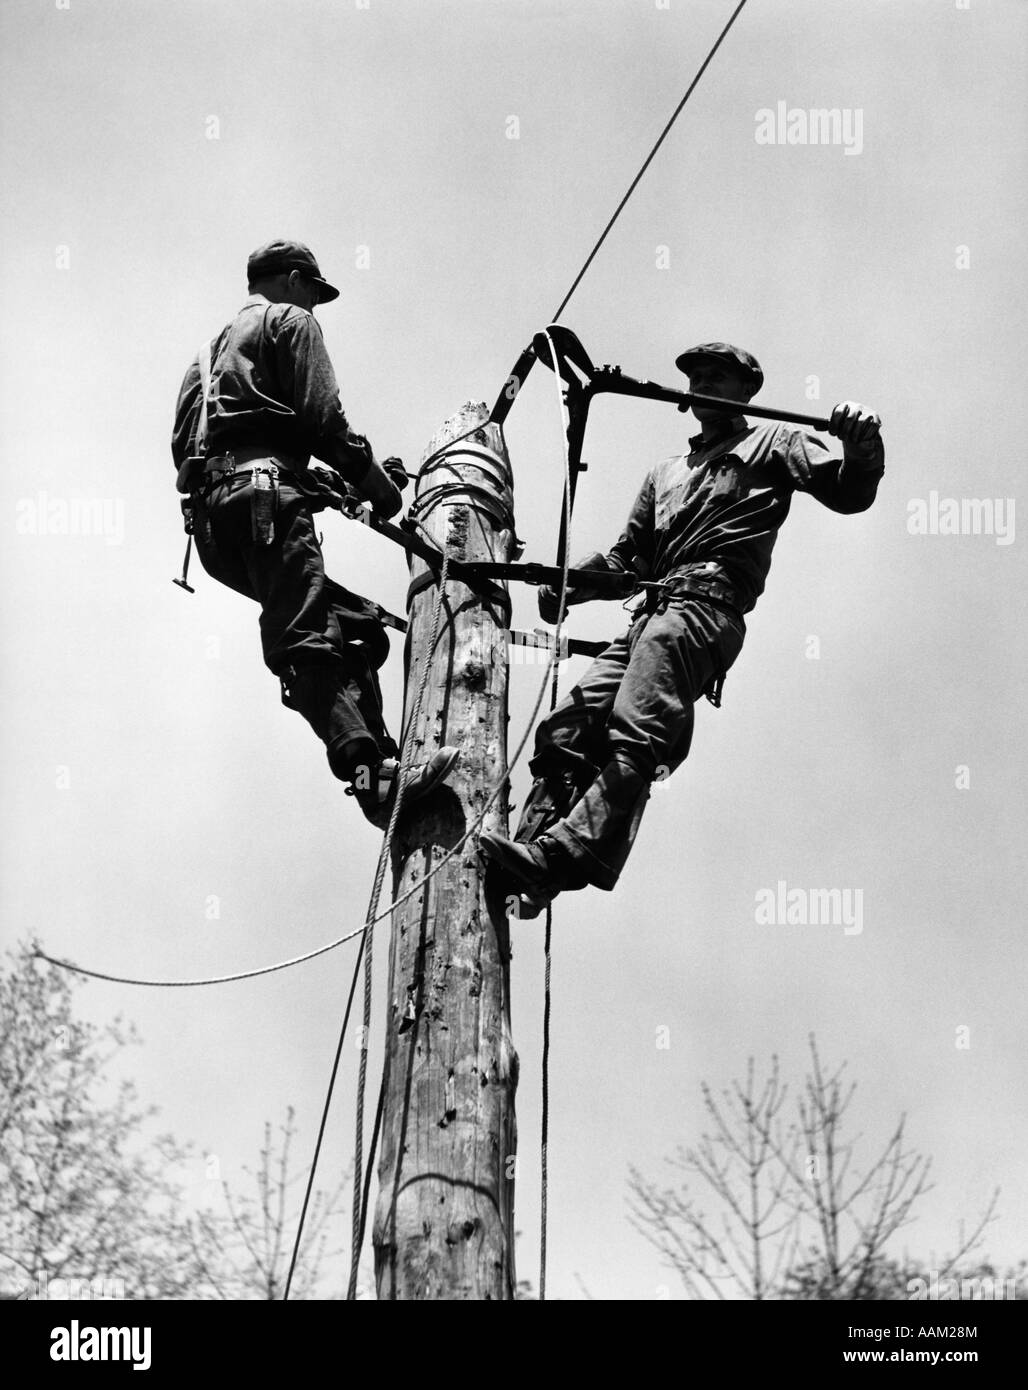 1930s 1940s TWO MEN WORKING ON ELECTRICAL POWER POLE CUTTING WIRE Stock